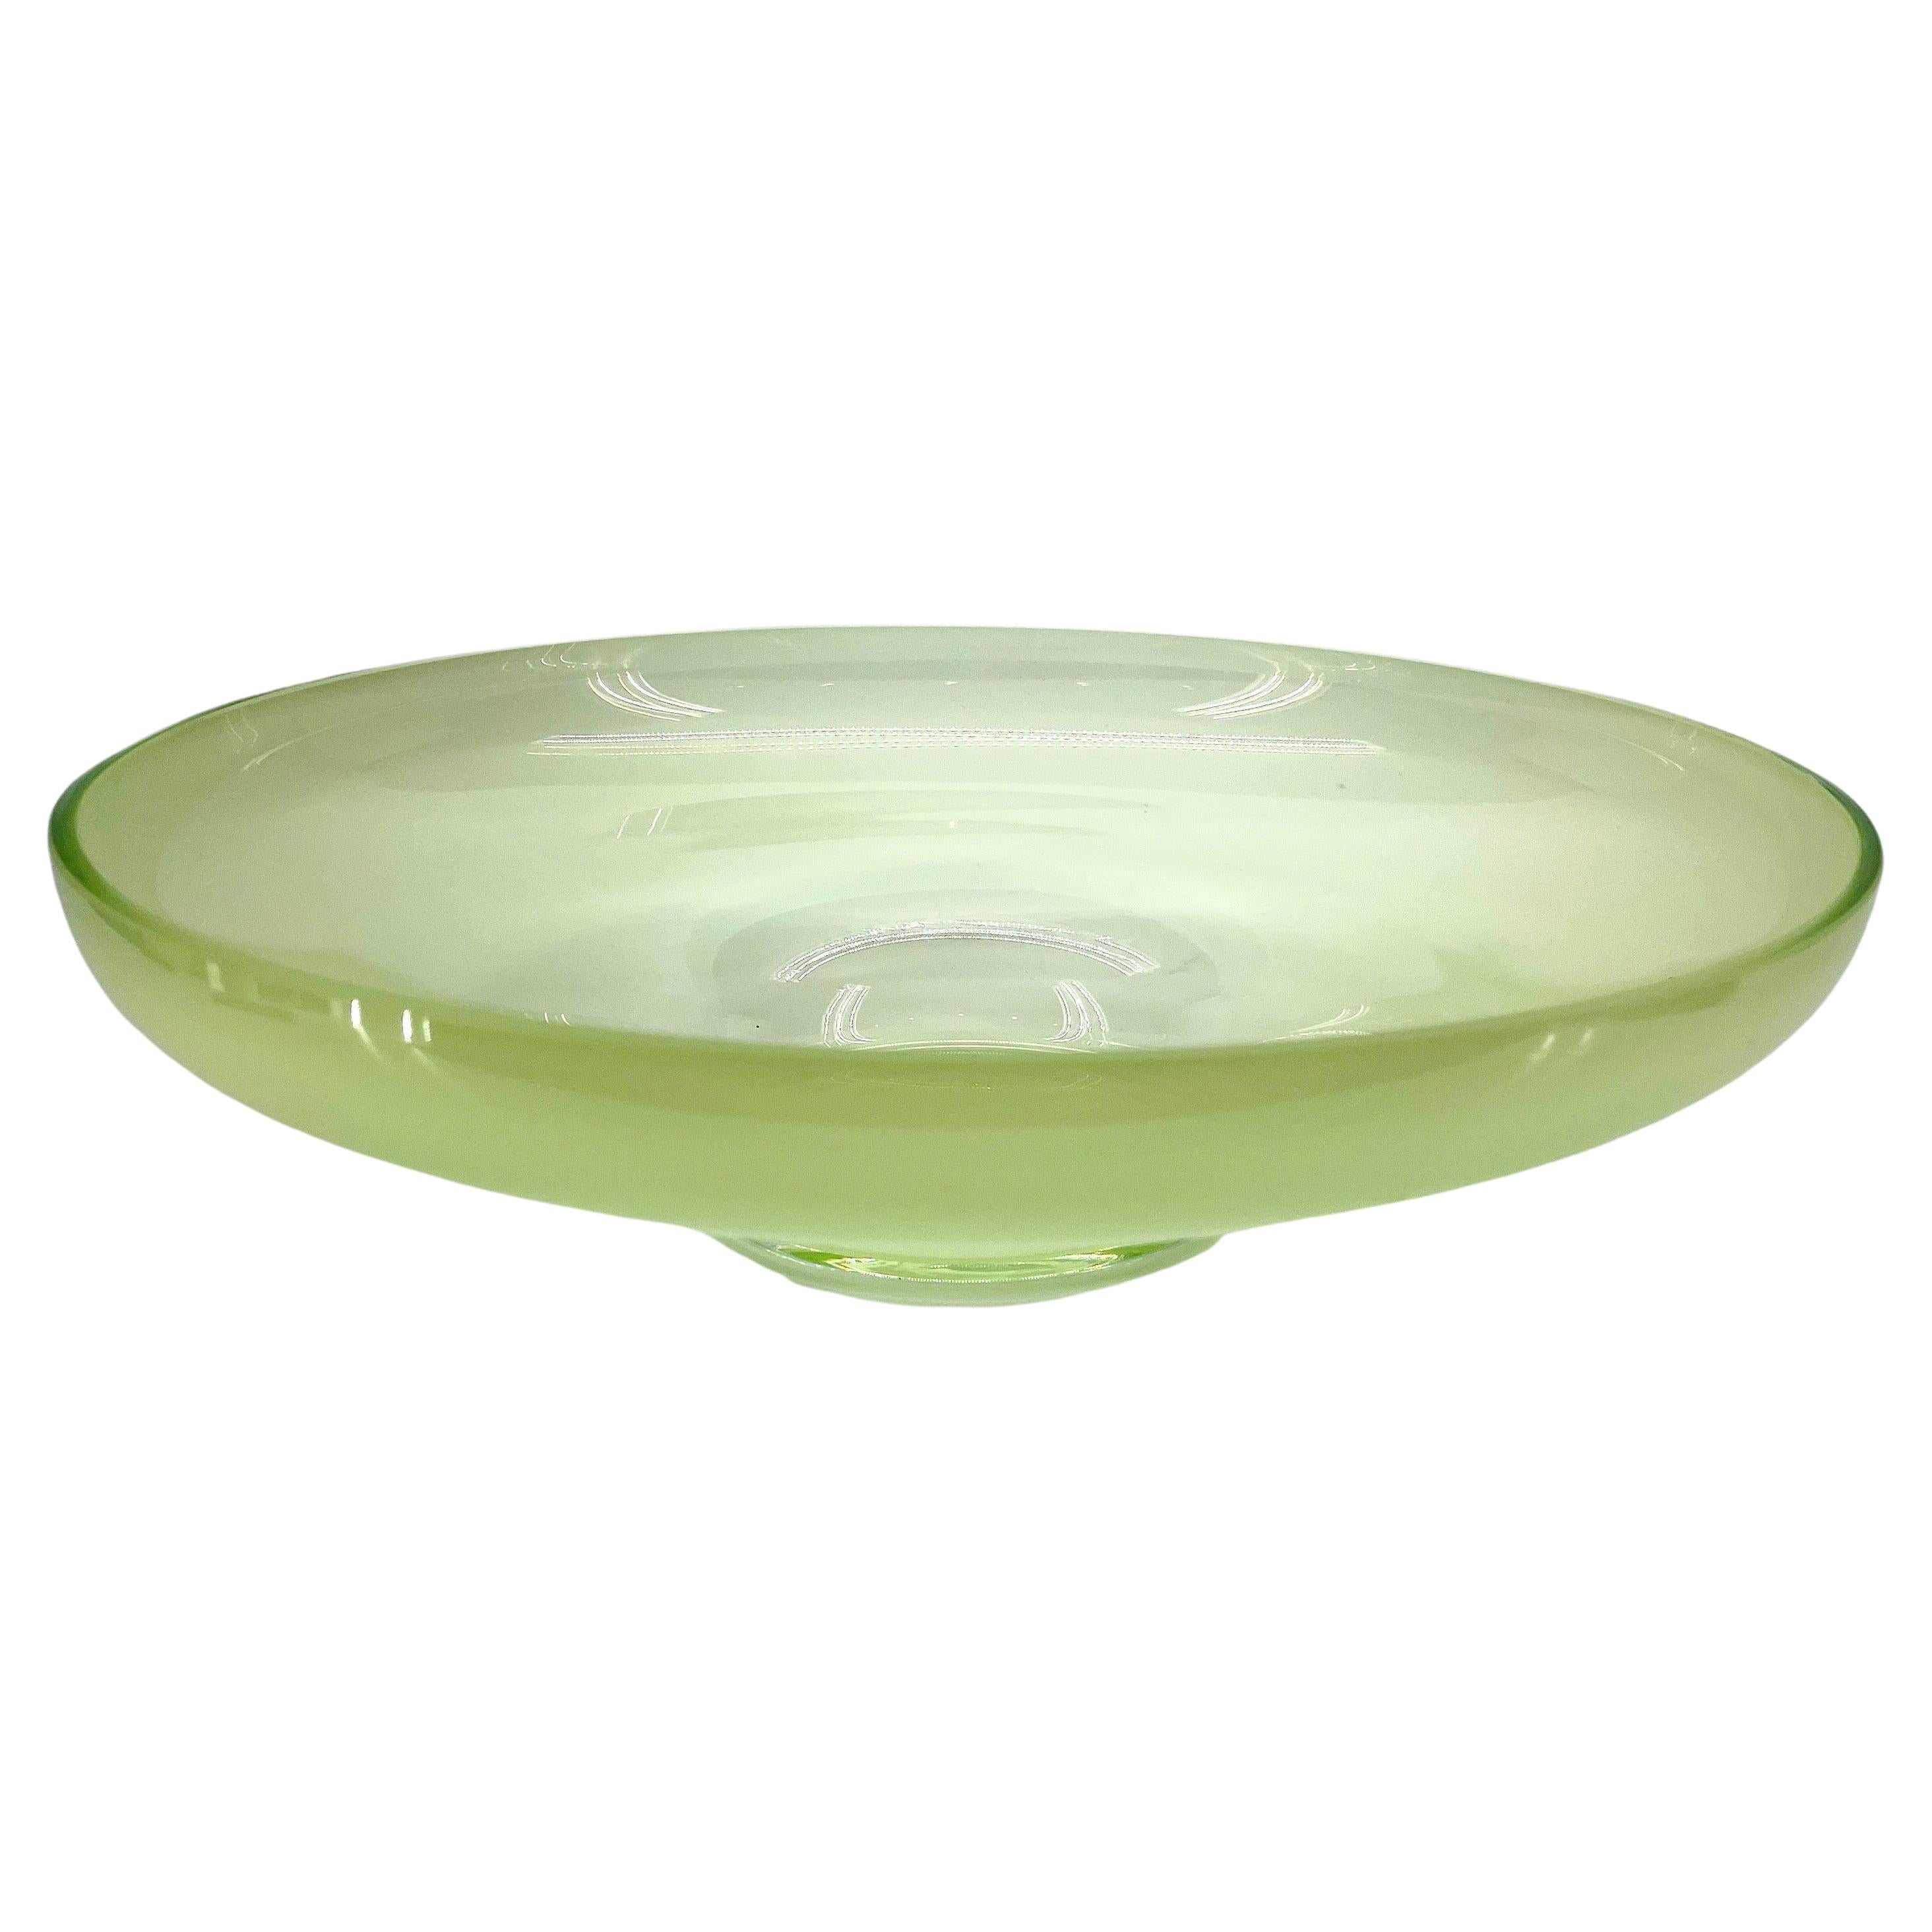 Green Opaline Murano Glass Centerpiece Bowl 

This very sturdy centerpiece bowl is both decorative as well as functional. The wear and tear to the base is un-beatble. This classic vintage bowl is a perfect statement piece in any formal or informal